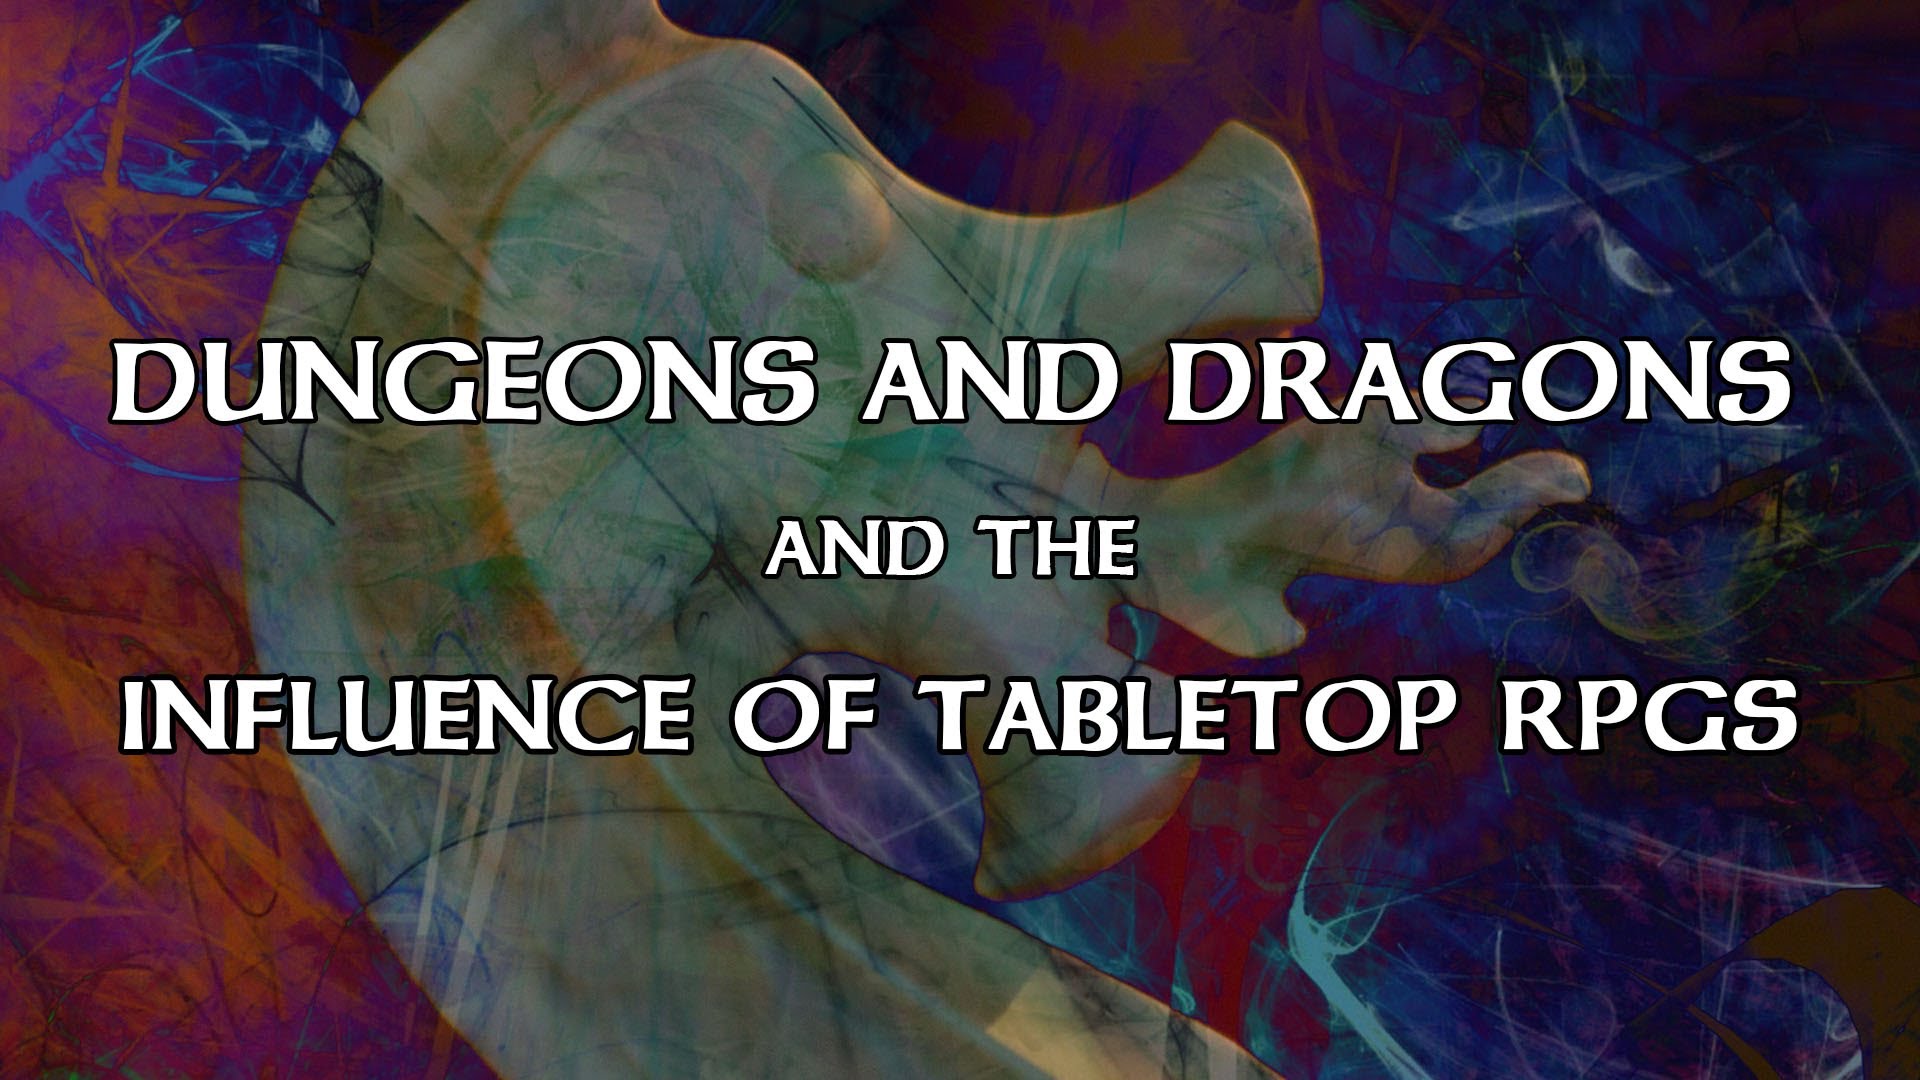 PBS Off Book Documentary on Dungeons & Dragons